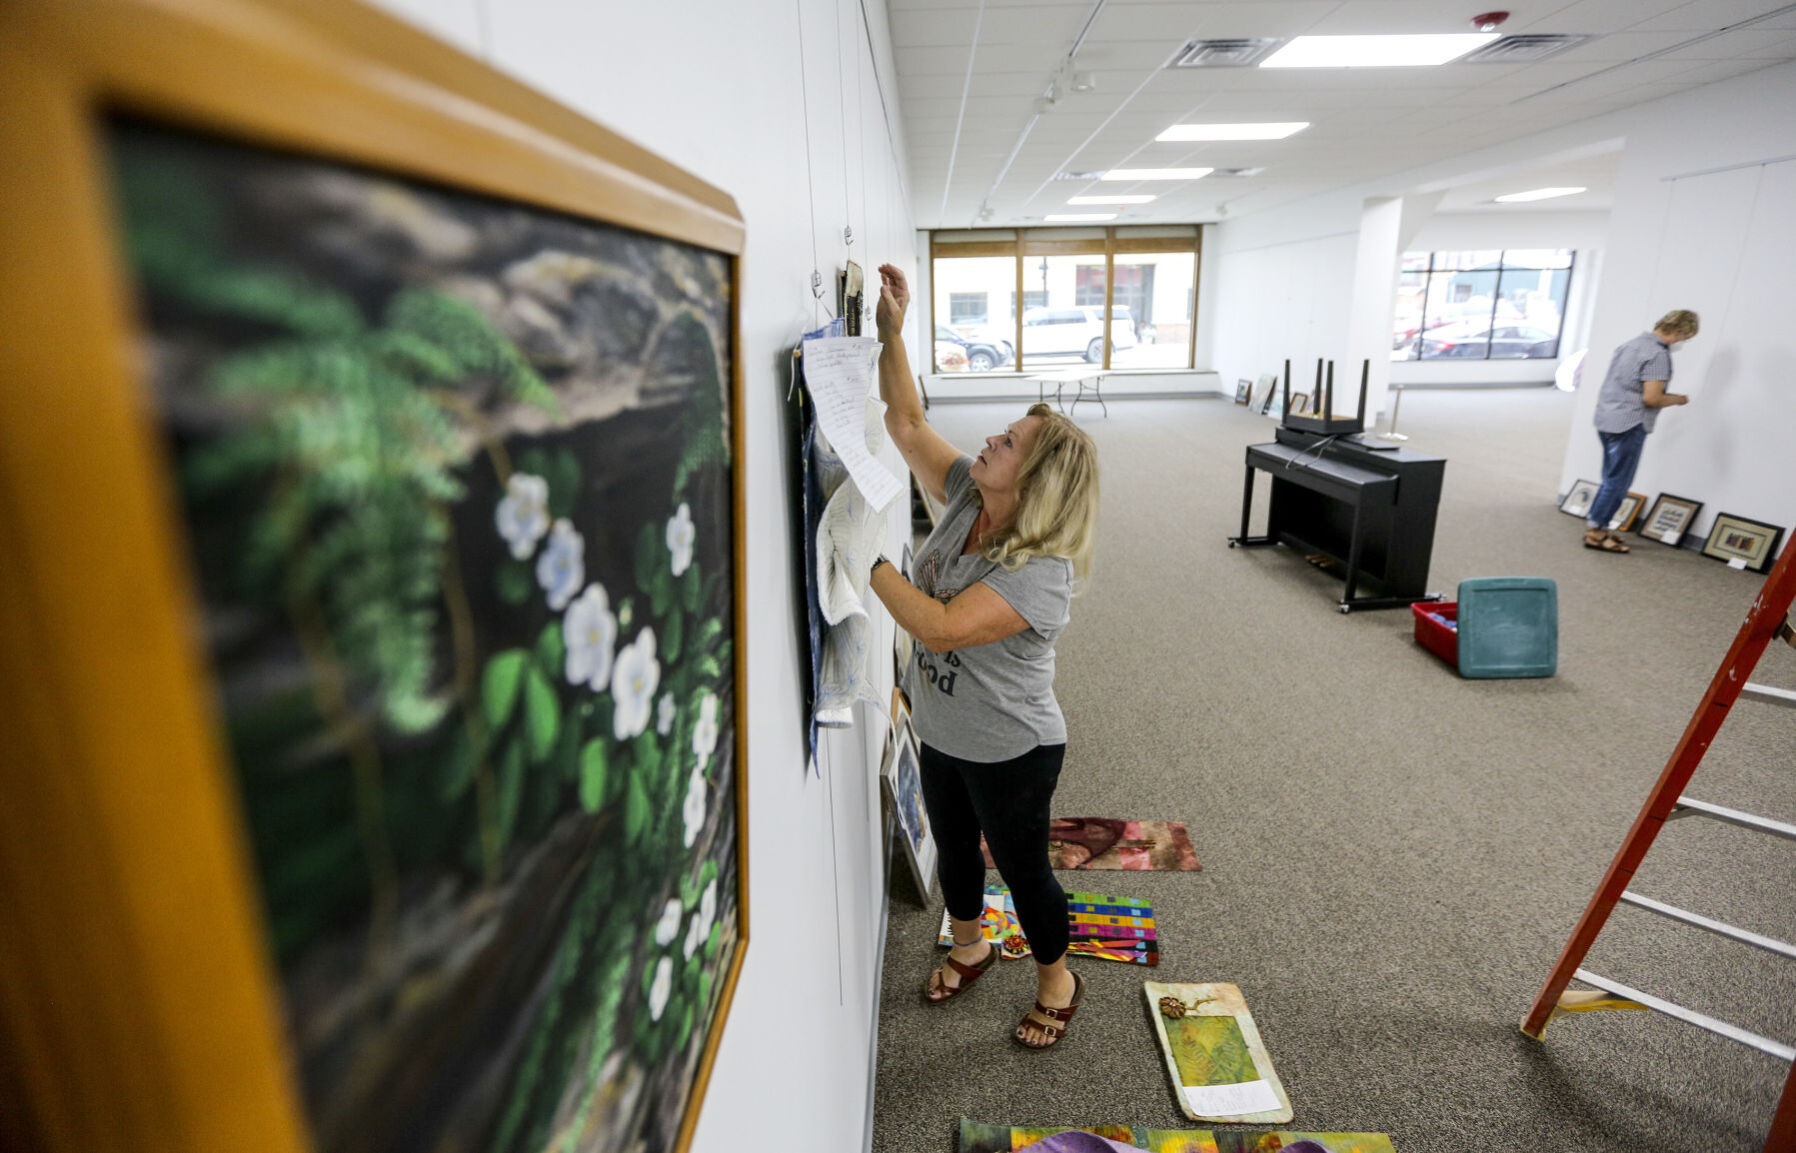 Volunteers Barb Bowman (left) and Helen Zabel hang up artwork inside the newly-renovated Maquoketa Art Experience, which shares a building with Maquoketa Chamber of Commerce, on Tuesday. The nonprofits reopened to the public this week.    PHOTO CREDIT: Dave Kettering